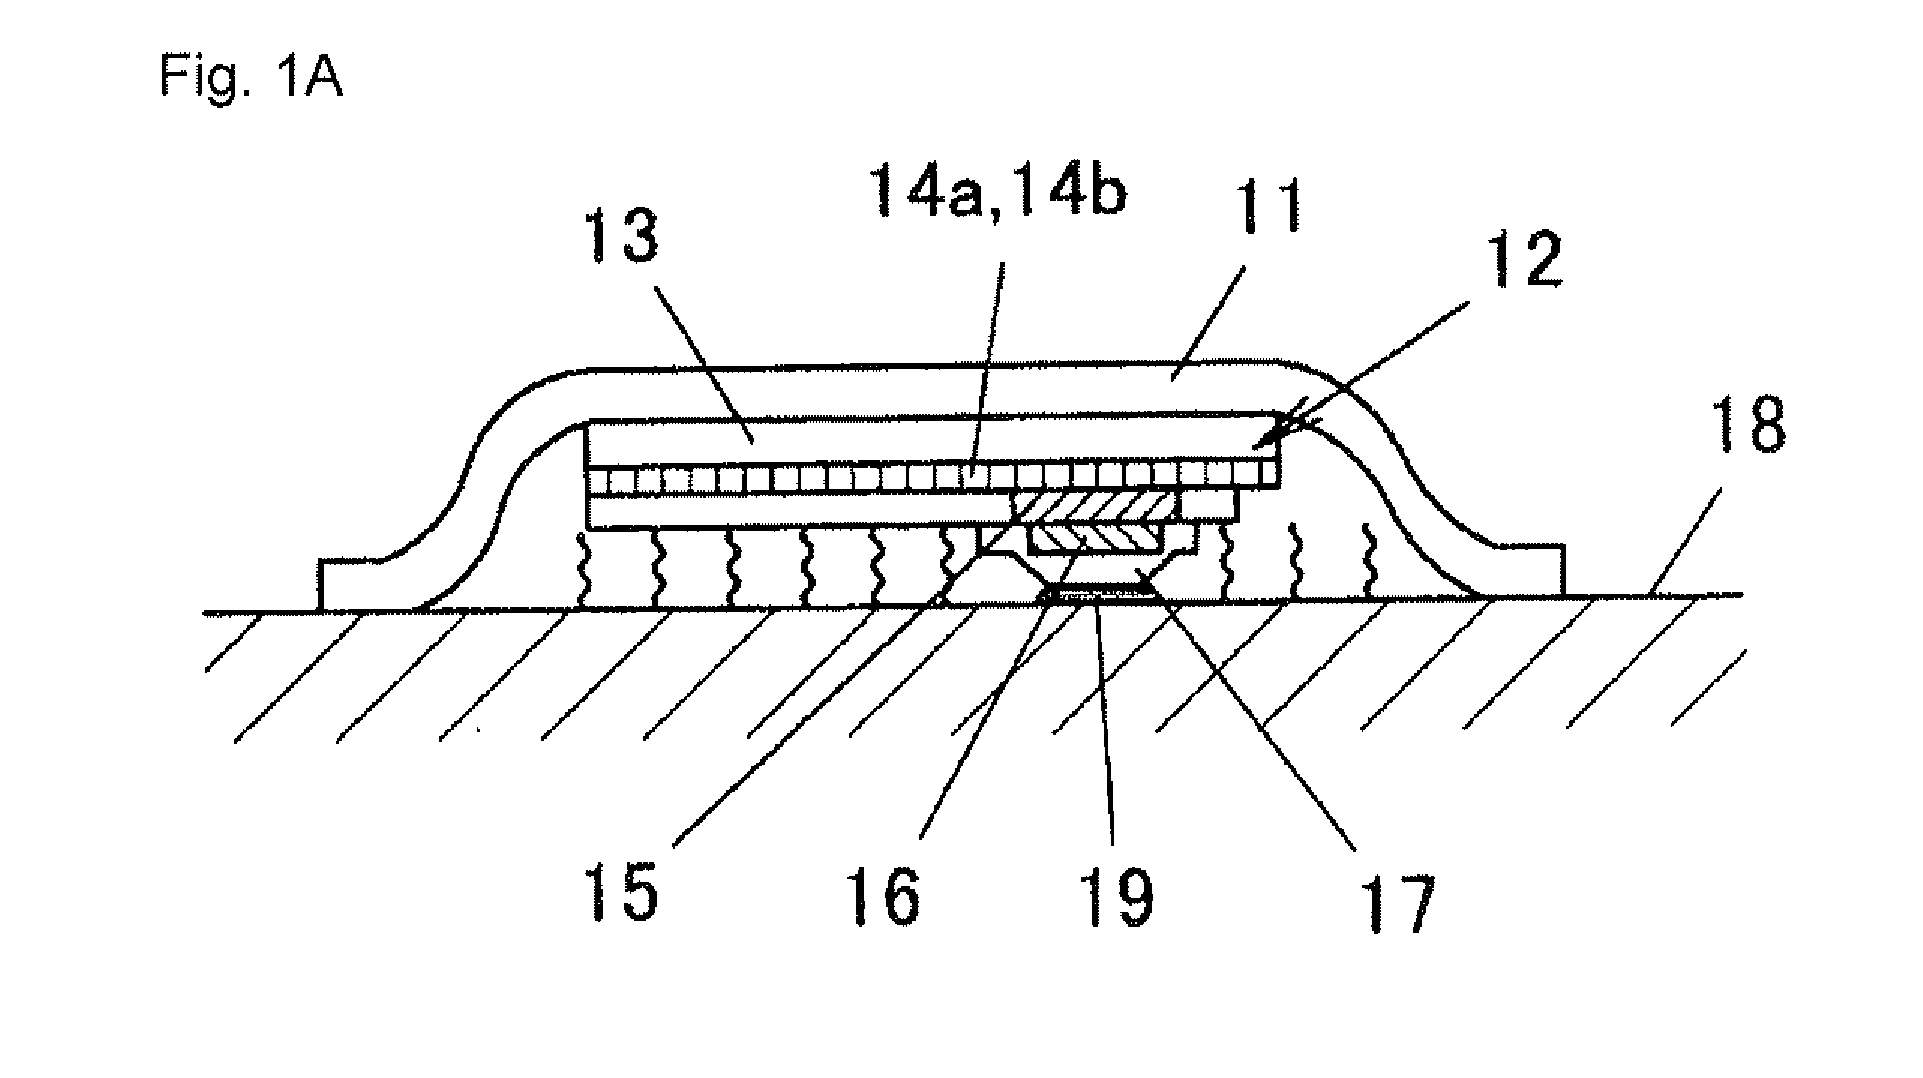 Body fluid collecting device for efficiently collecting body fluid and body fluid analyzer for accurate analysis